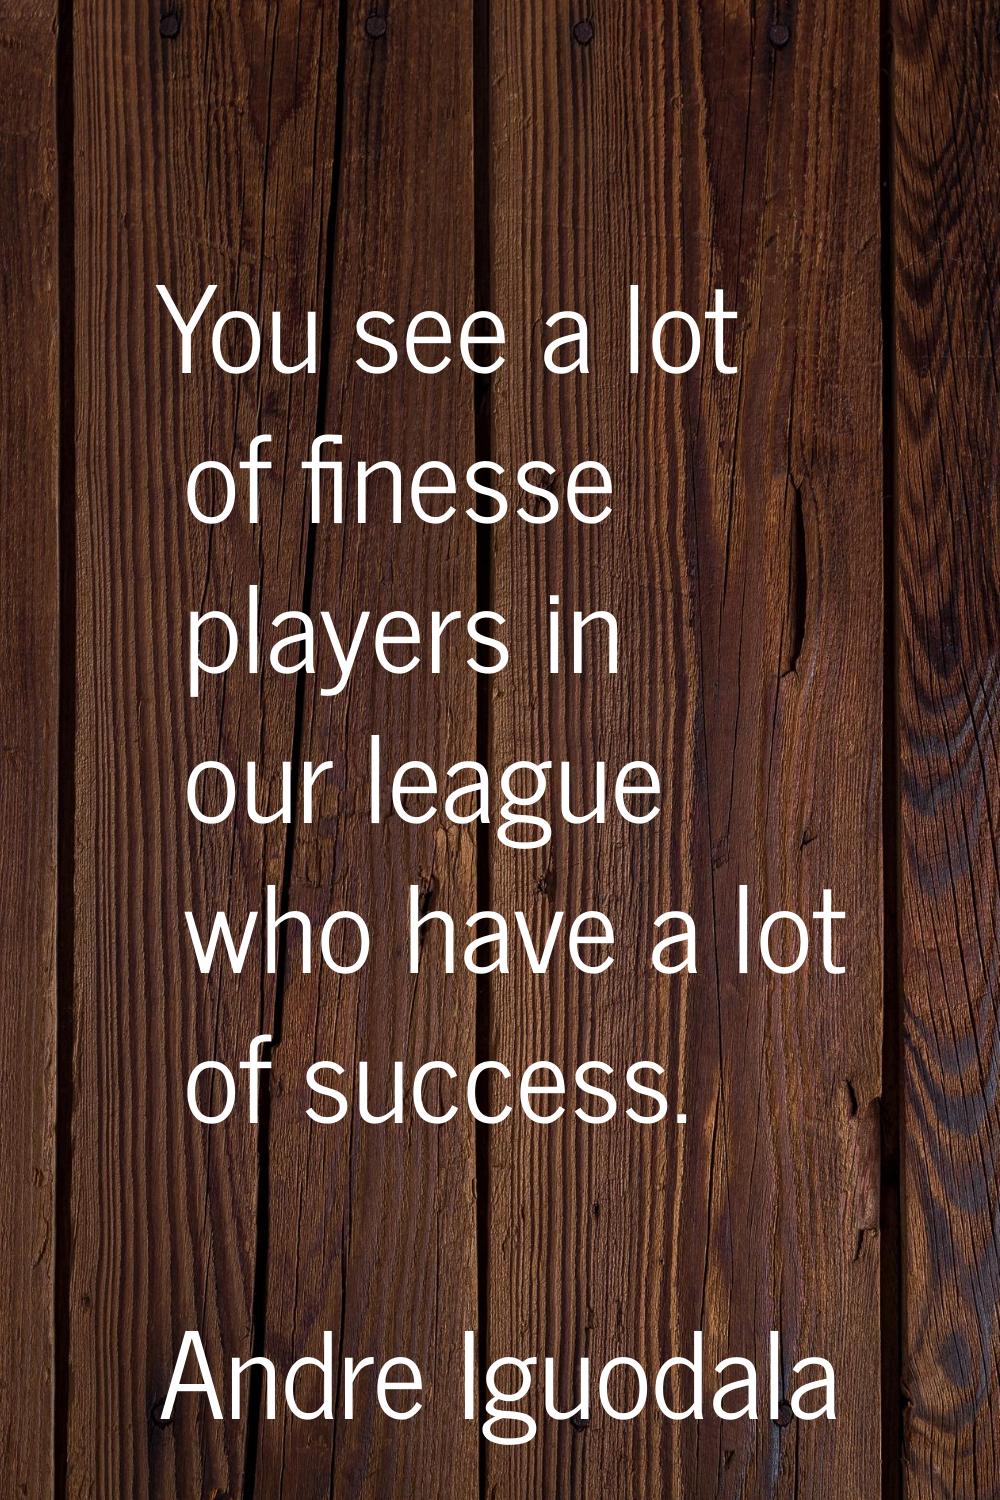 You see a lot of finesse players in our league who have a lot of success.